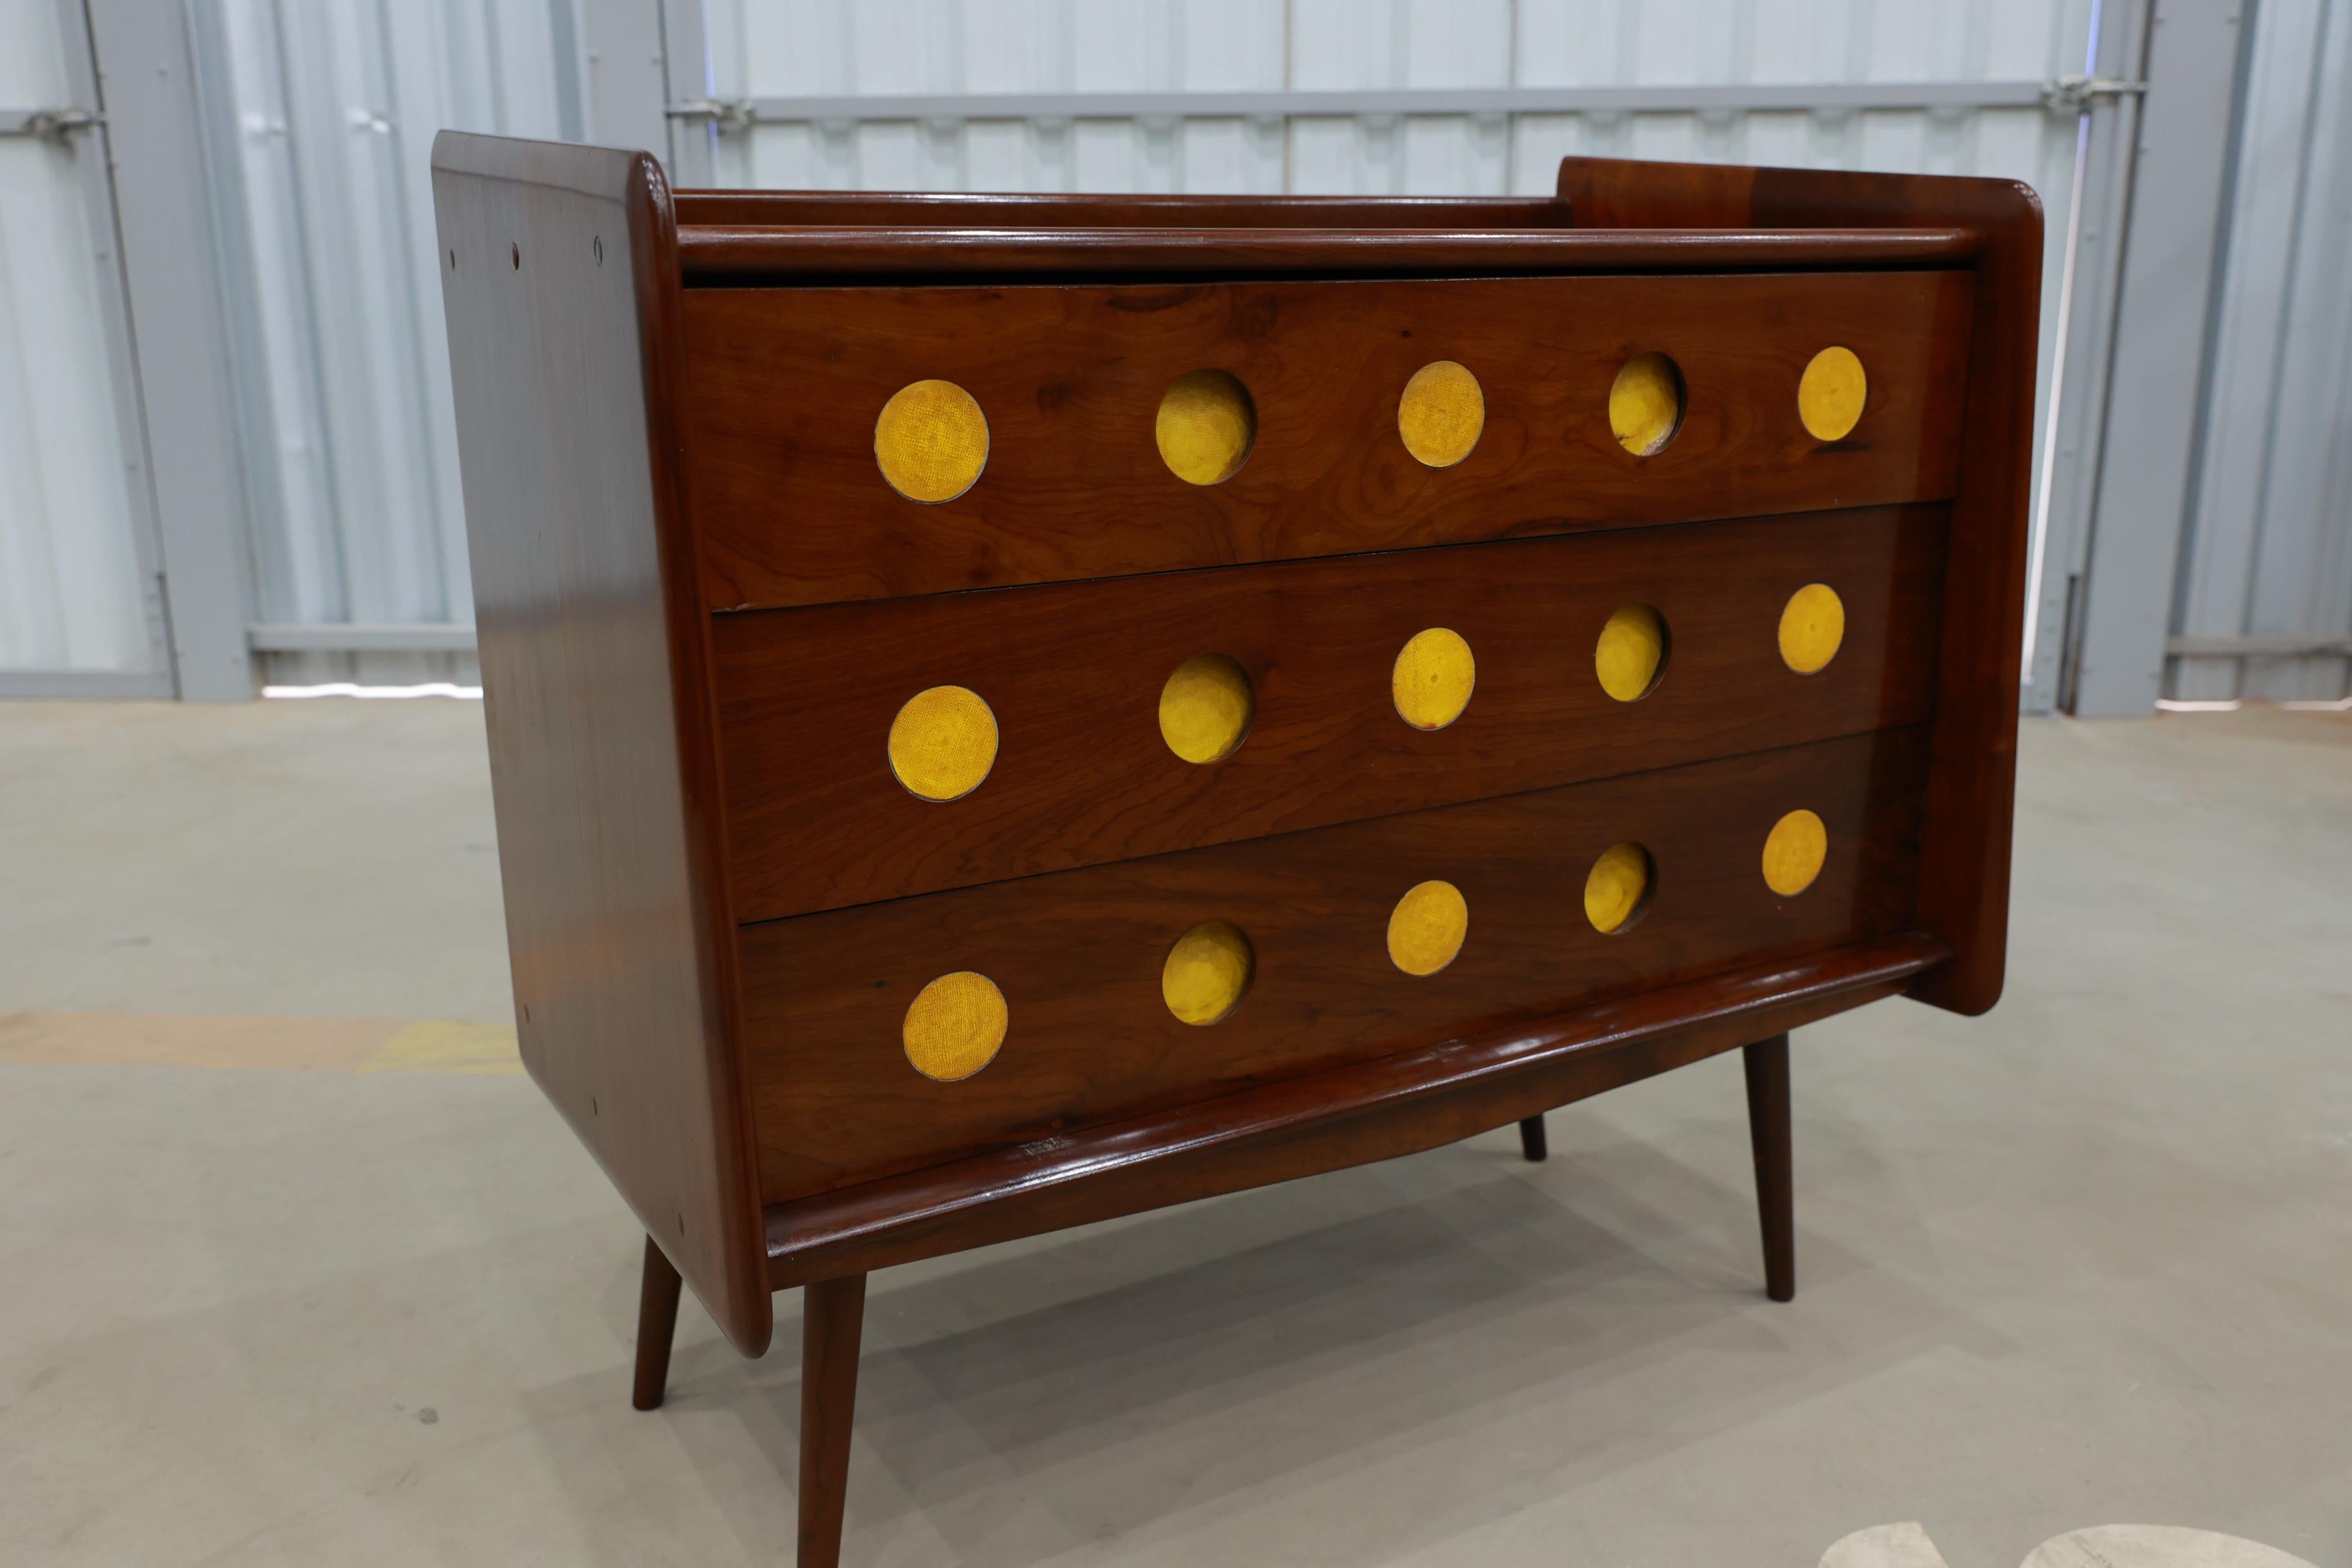 Brazilian Modern Chest of Drawers in Hardwood by Moveis Cimo, 1950s, Brazil For Sale 1